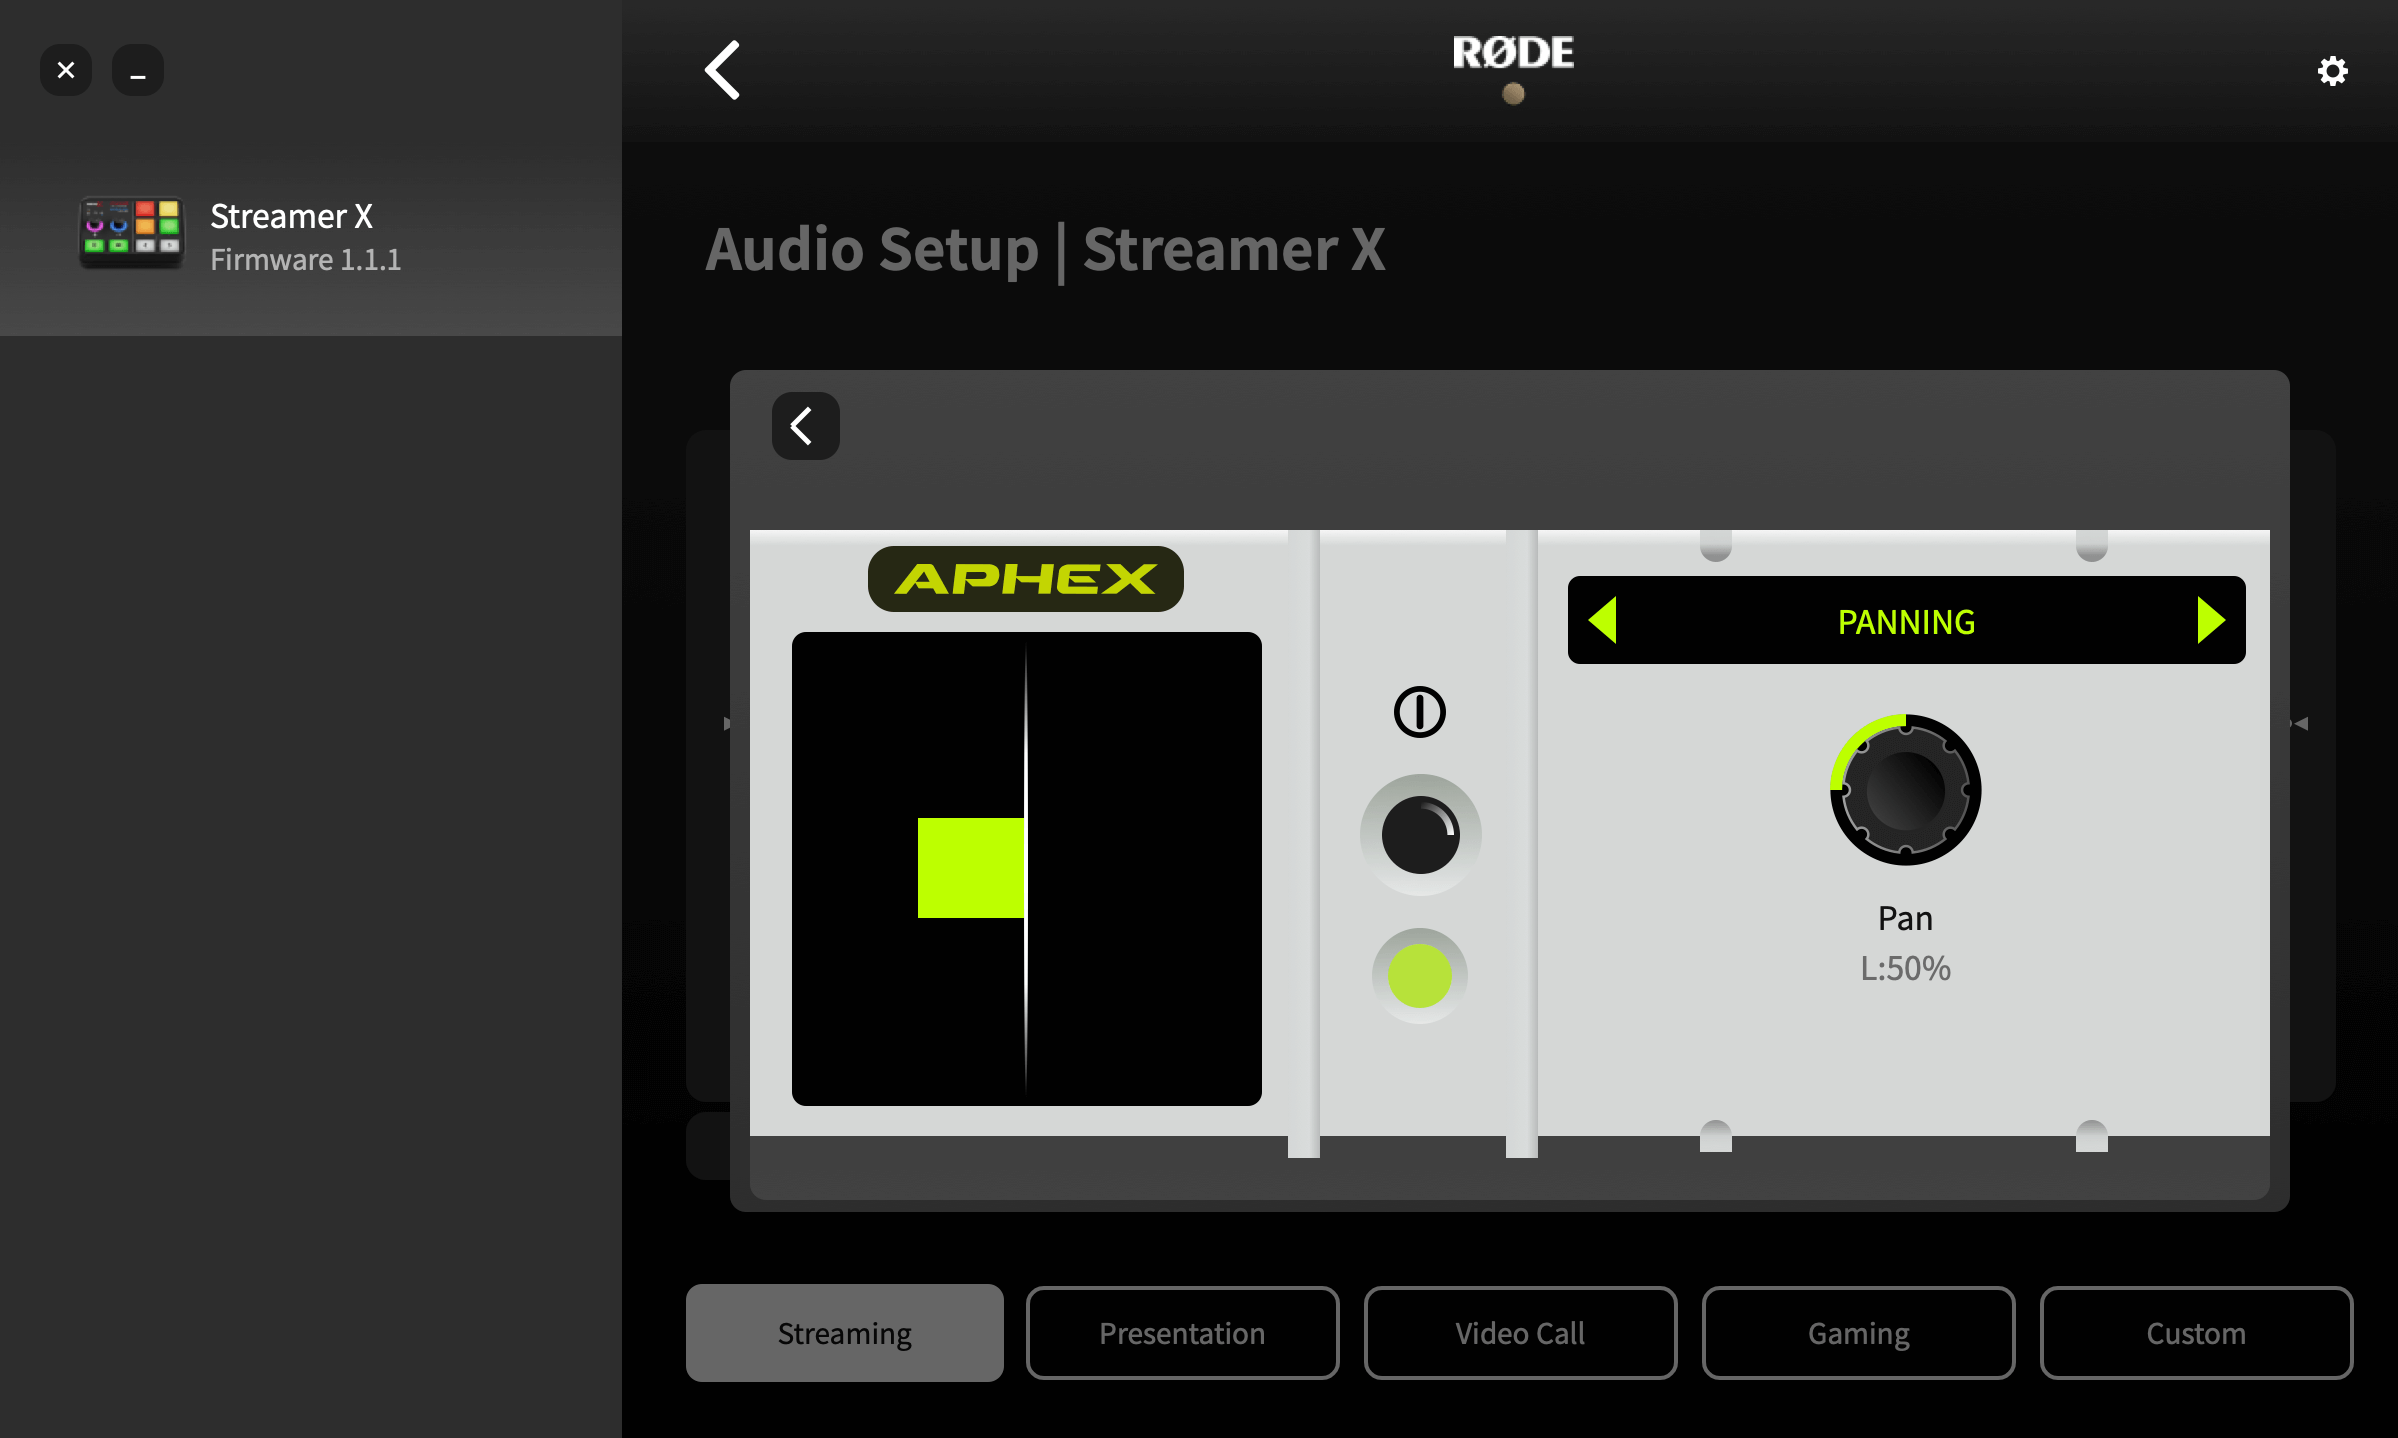 RØDE Central showing Streamer X panning settings